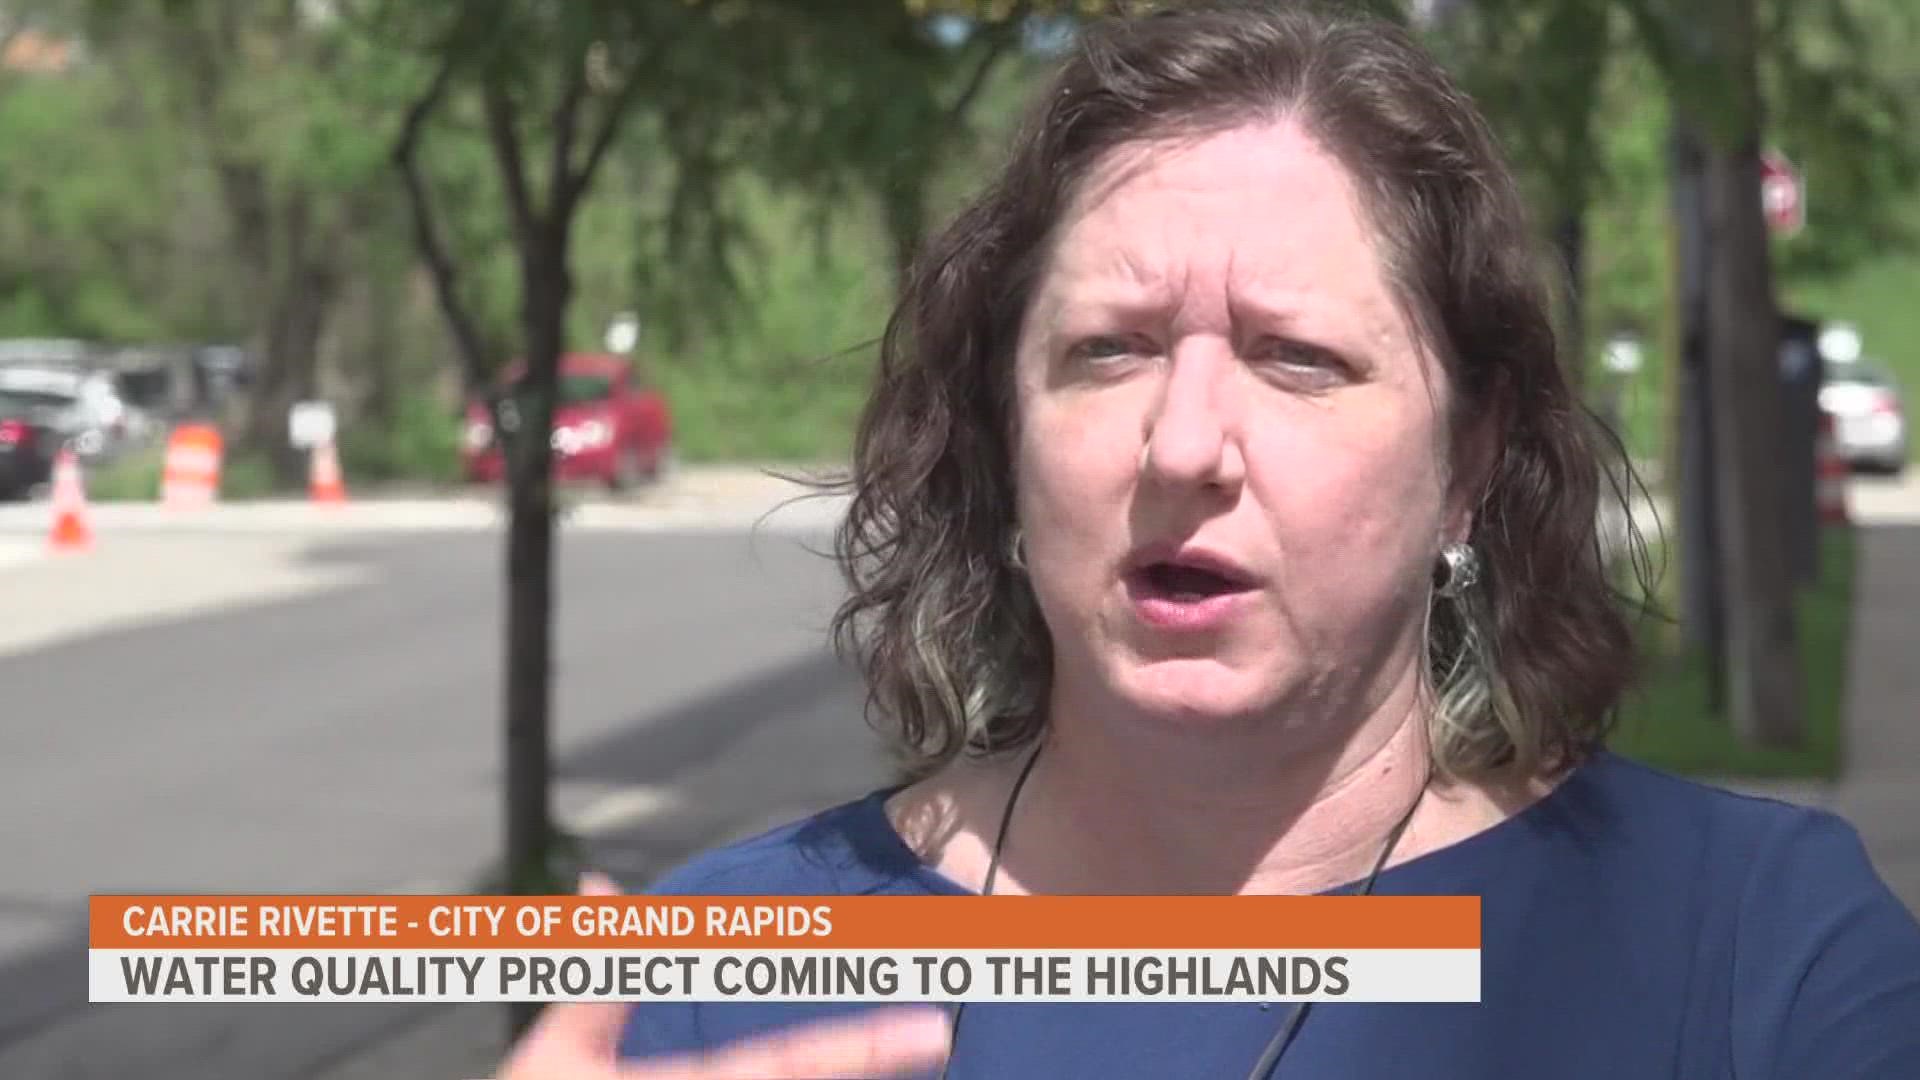 An underground stream on the West Side of Grand Rapids is about to be converted back into a natural stream with the hopes of improving water quality.